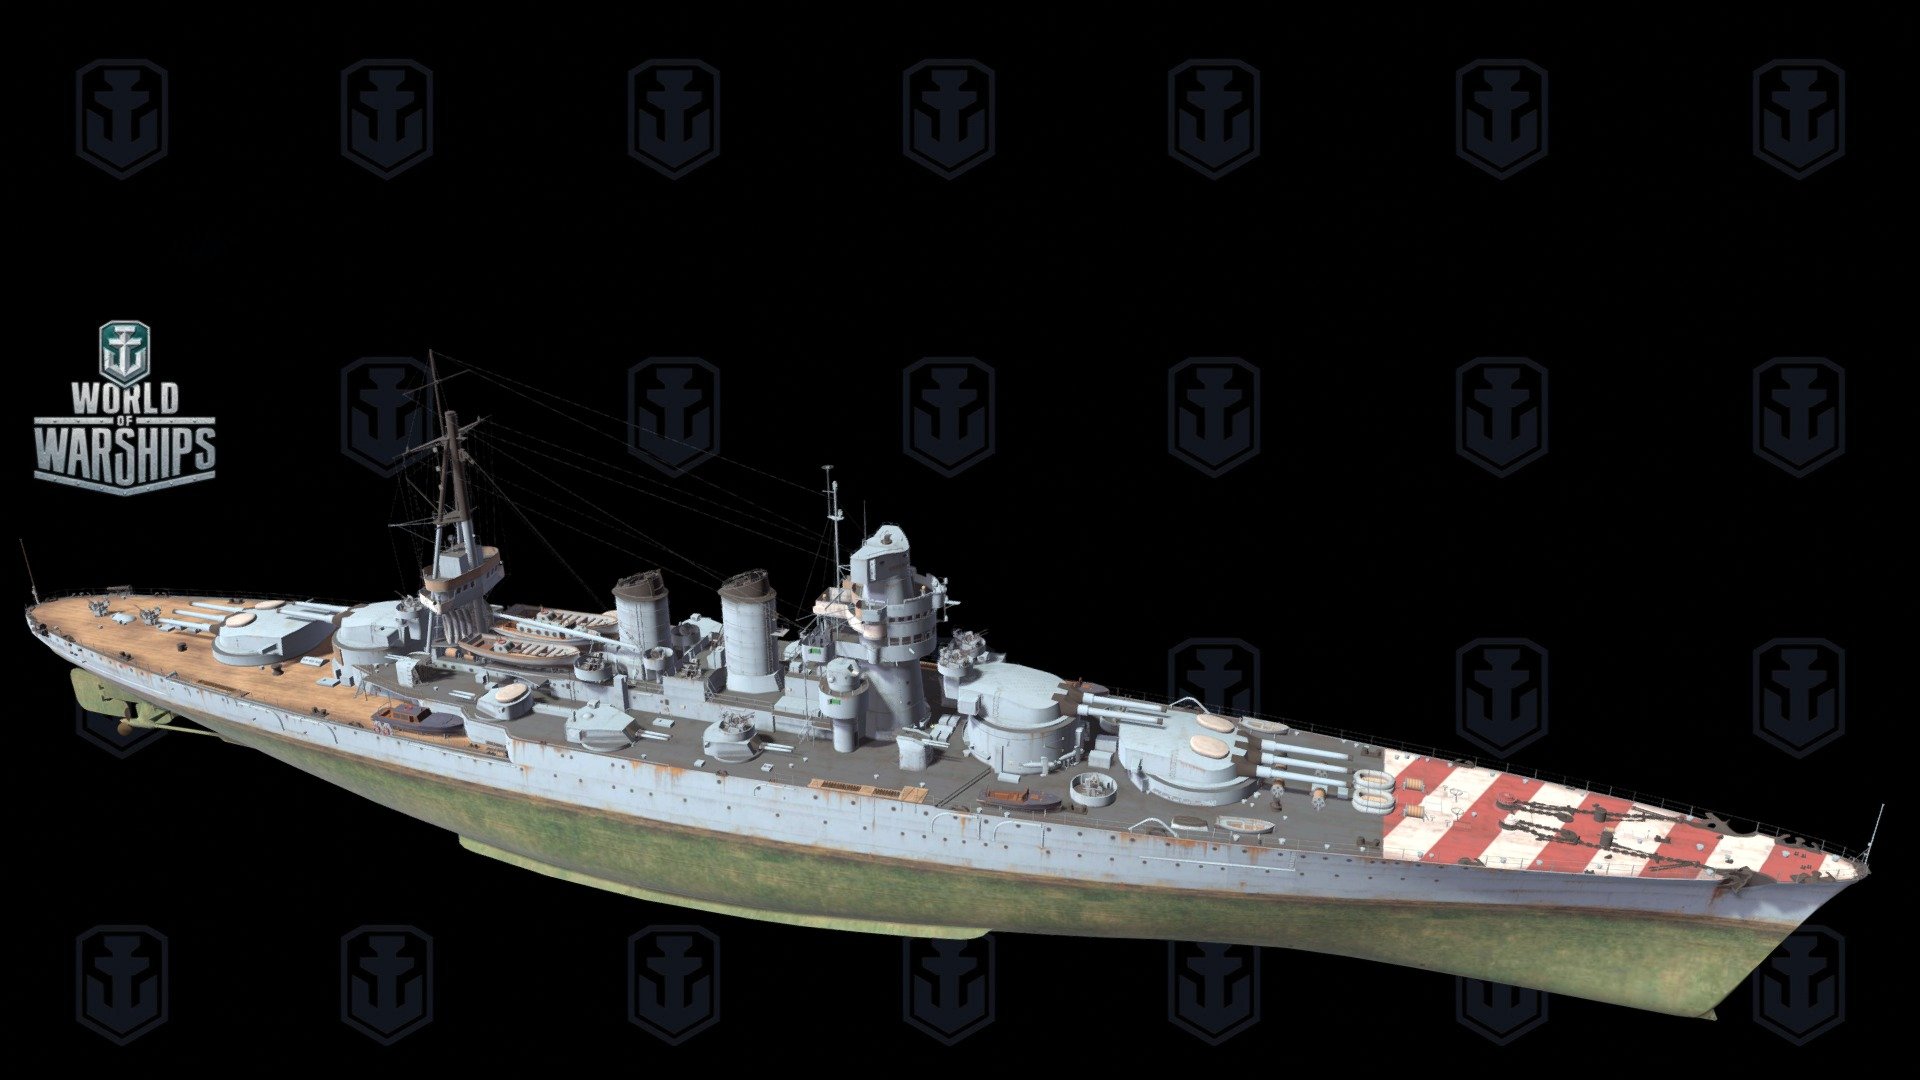 Giulio Cesare — Italian promo premium Tier V battleship.

The lead ship in the first series of Italian dreadnoughts. In the 1930s, the ship was rebuilt with more powerful and longer-firing guns, additional torpedo protection and considerably more speed than before, making her a formidable opponent for the majority of battleships at that time.

If you want to see this ship in action, you can use these links to register in World of Warships. If you choose so, you'll get a week of WoWS premium account and premium battleship Dreadnought.


CIS server
NA server
EU server
SEA server 

Please note that this offer ends on 07/01/2022 3d model